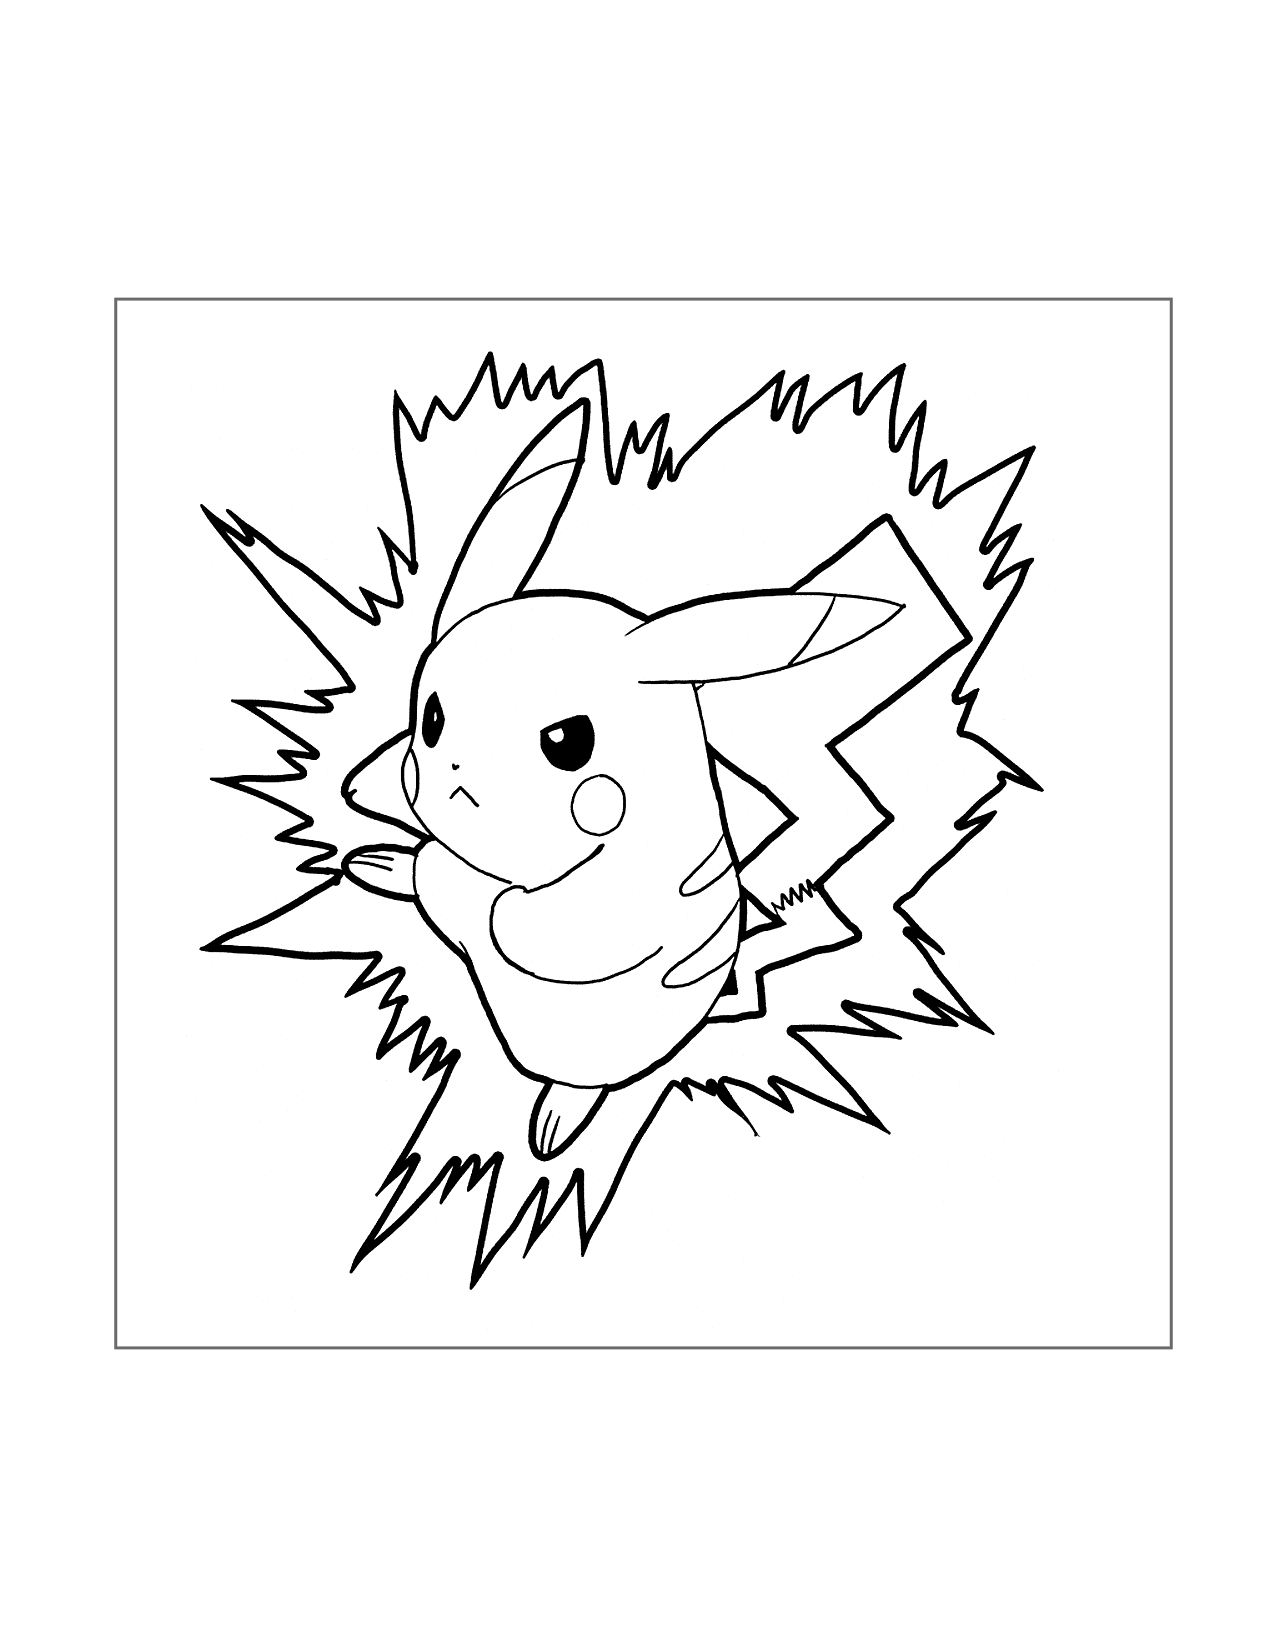 Electric Pikachu Coloring Page